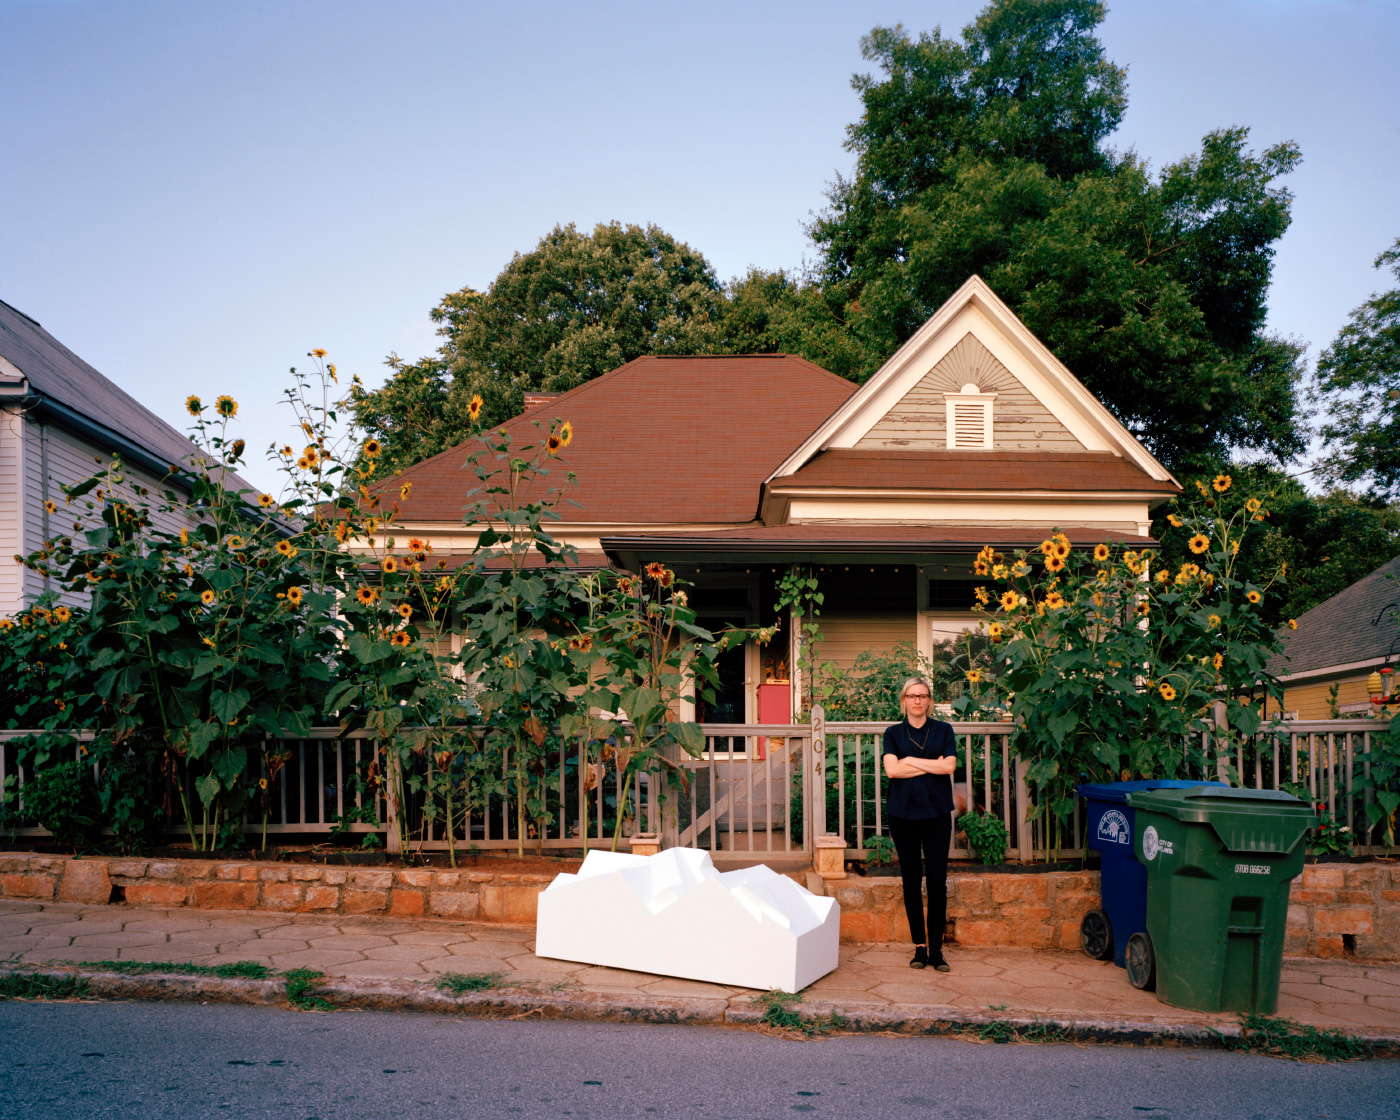 A photo of Jennifer Bonner and a gabled housing model on the sidewalk